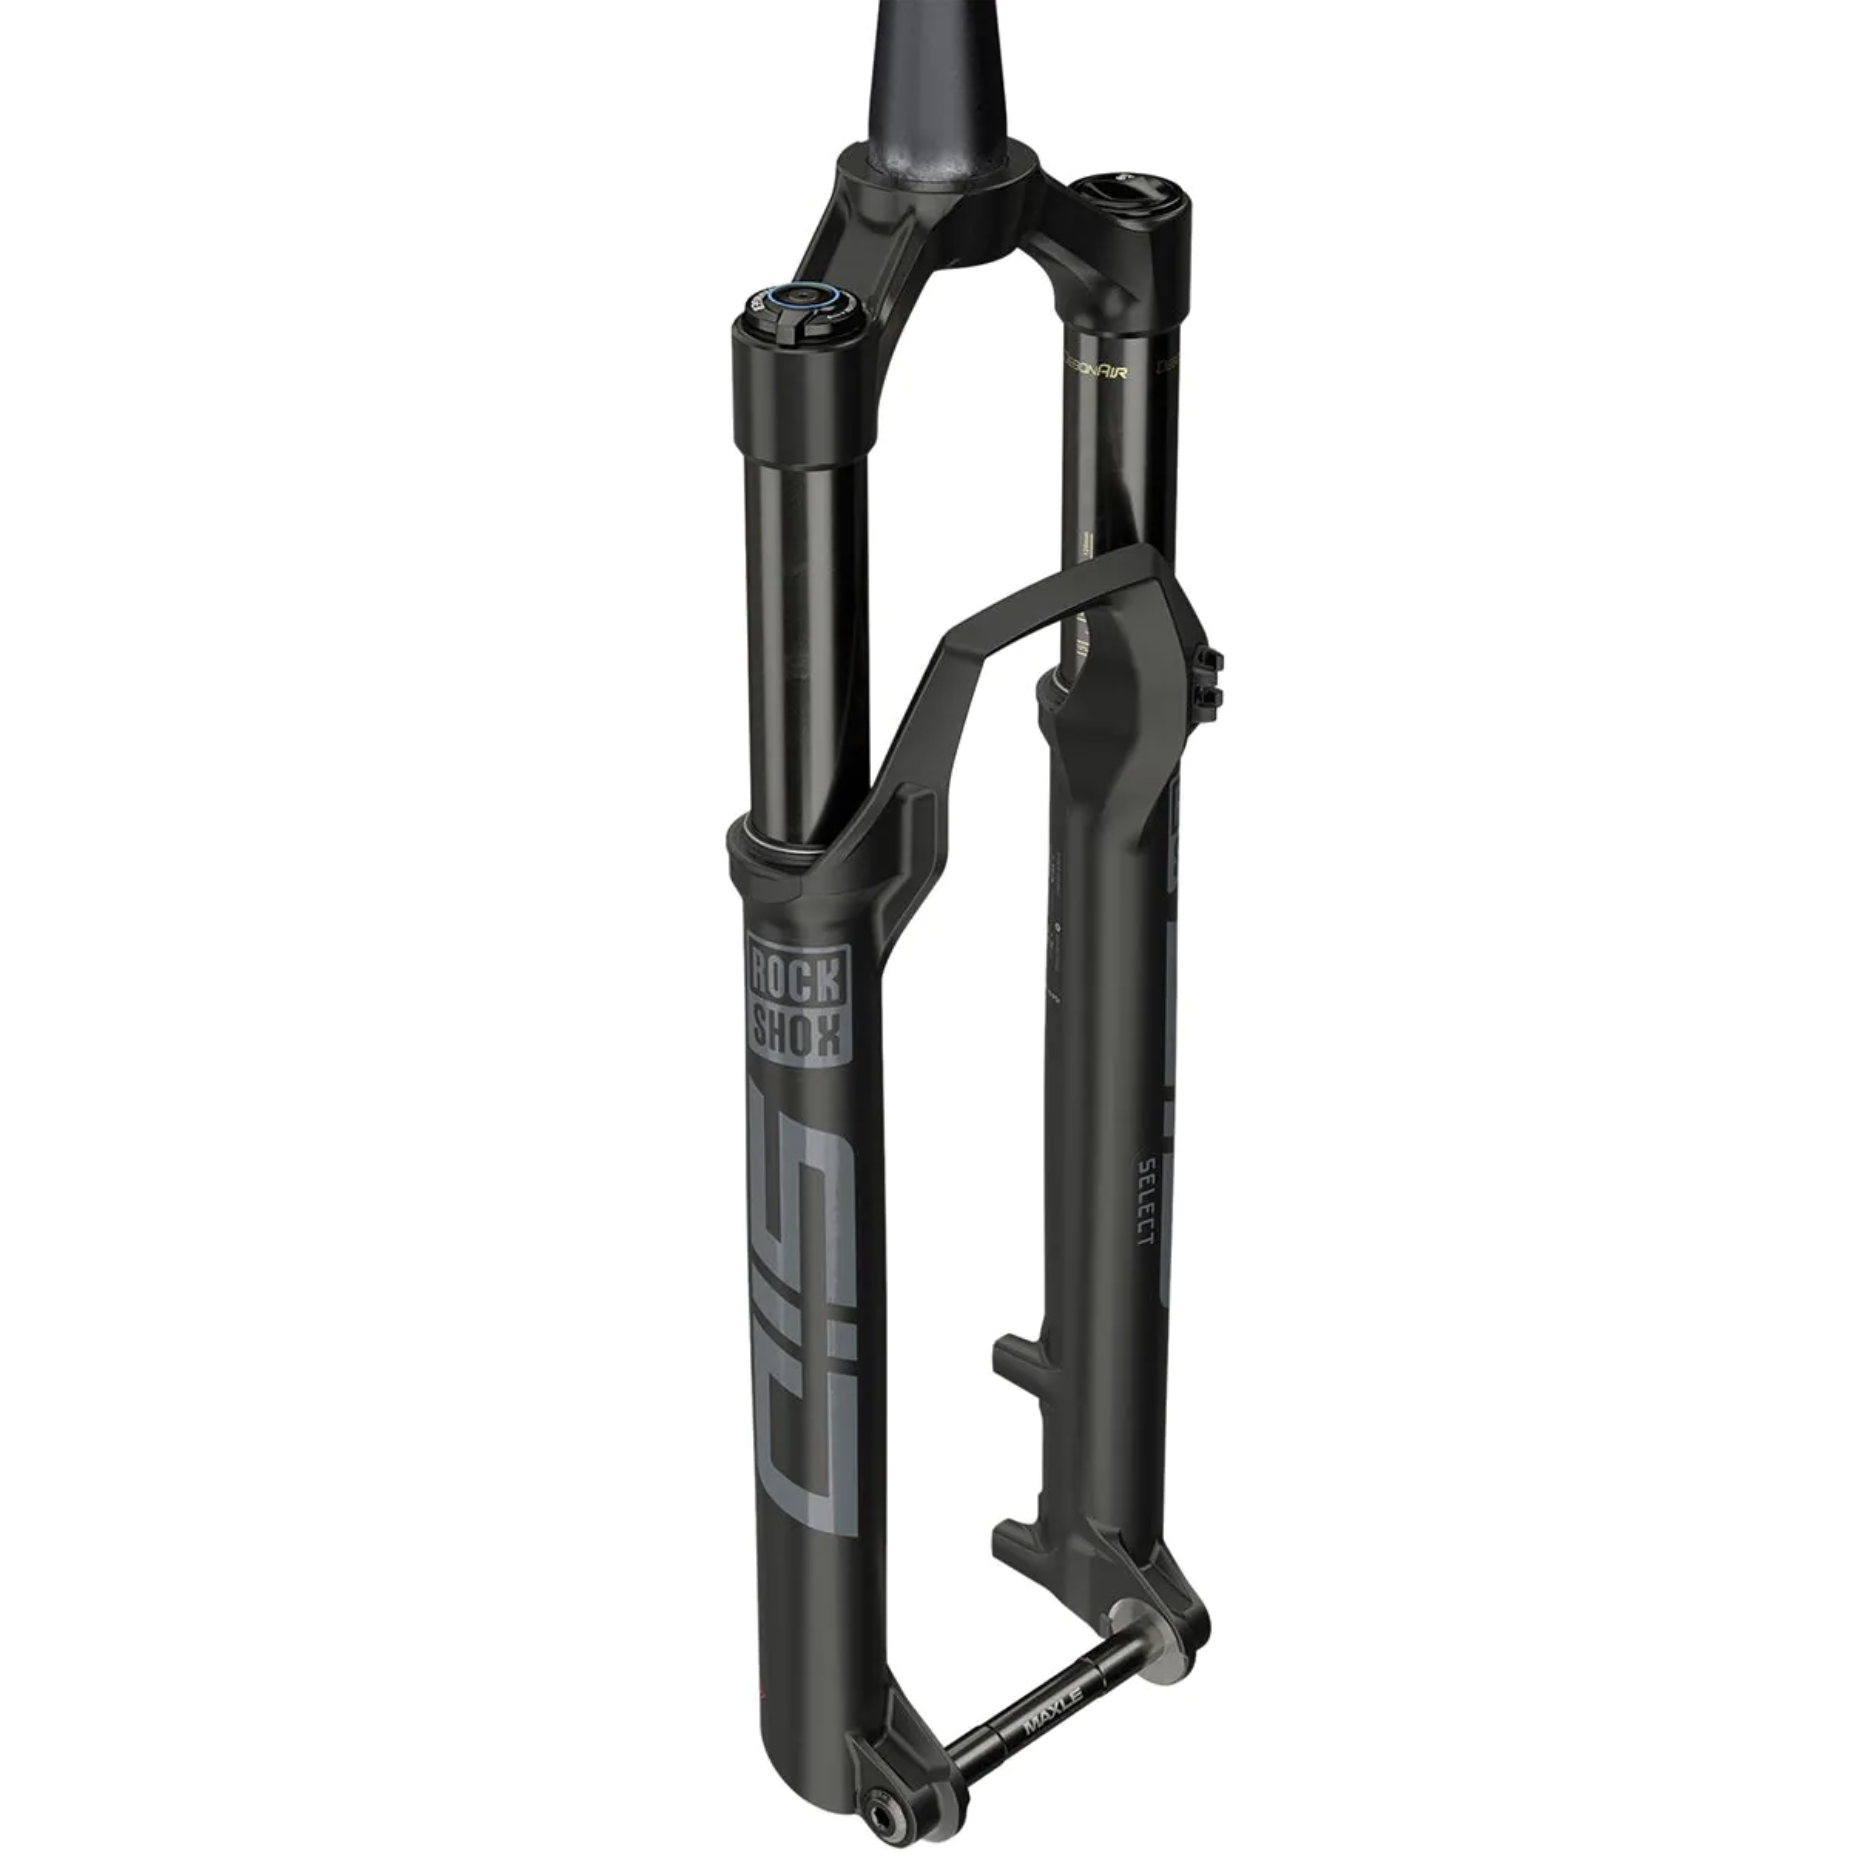 Simular oasis desastre RockShox RockShox SID Select Charger RL Suspension Fork - 29 120 mm 15 x  110 mm 44 mm Offset Diffusion Black C1 - One On One Bicycle Studio